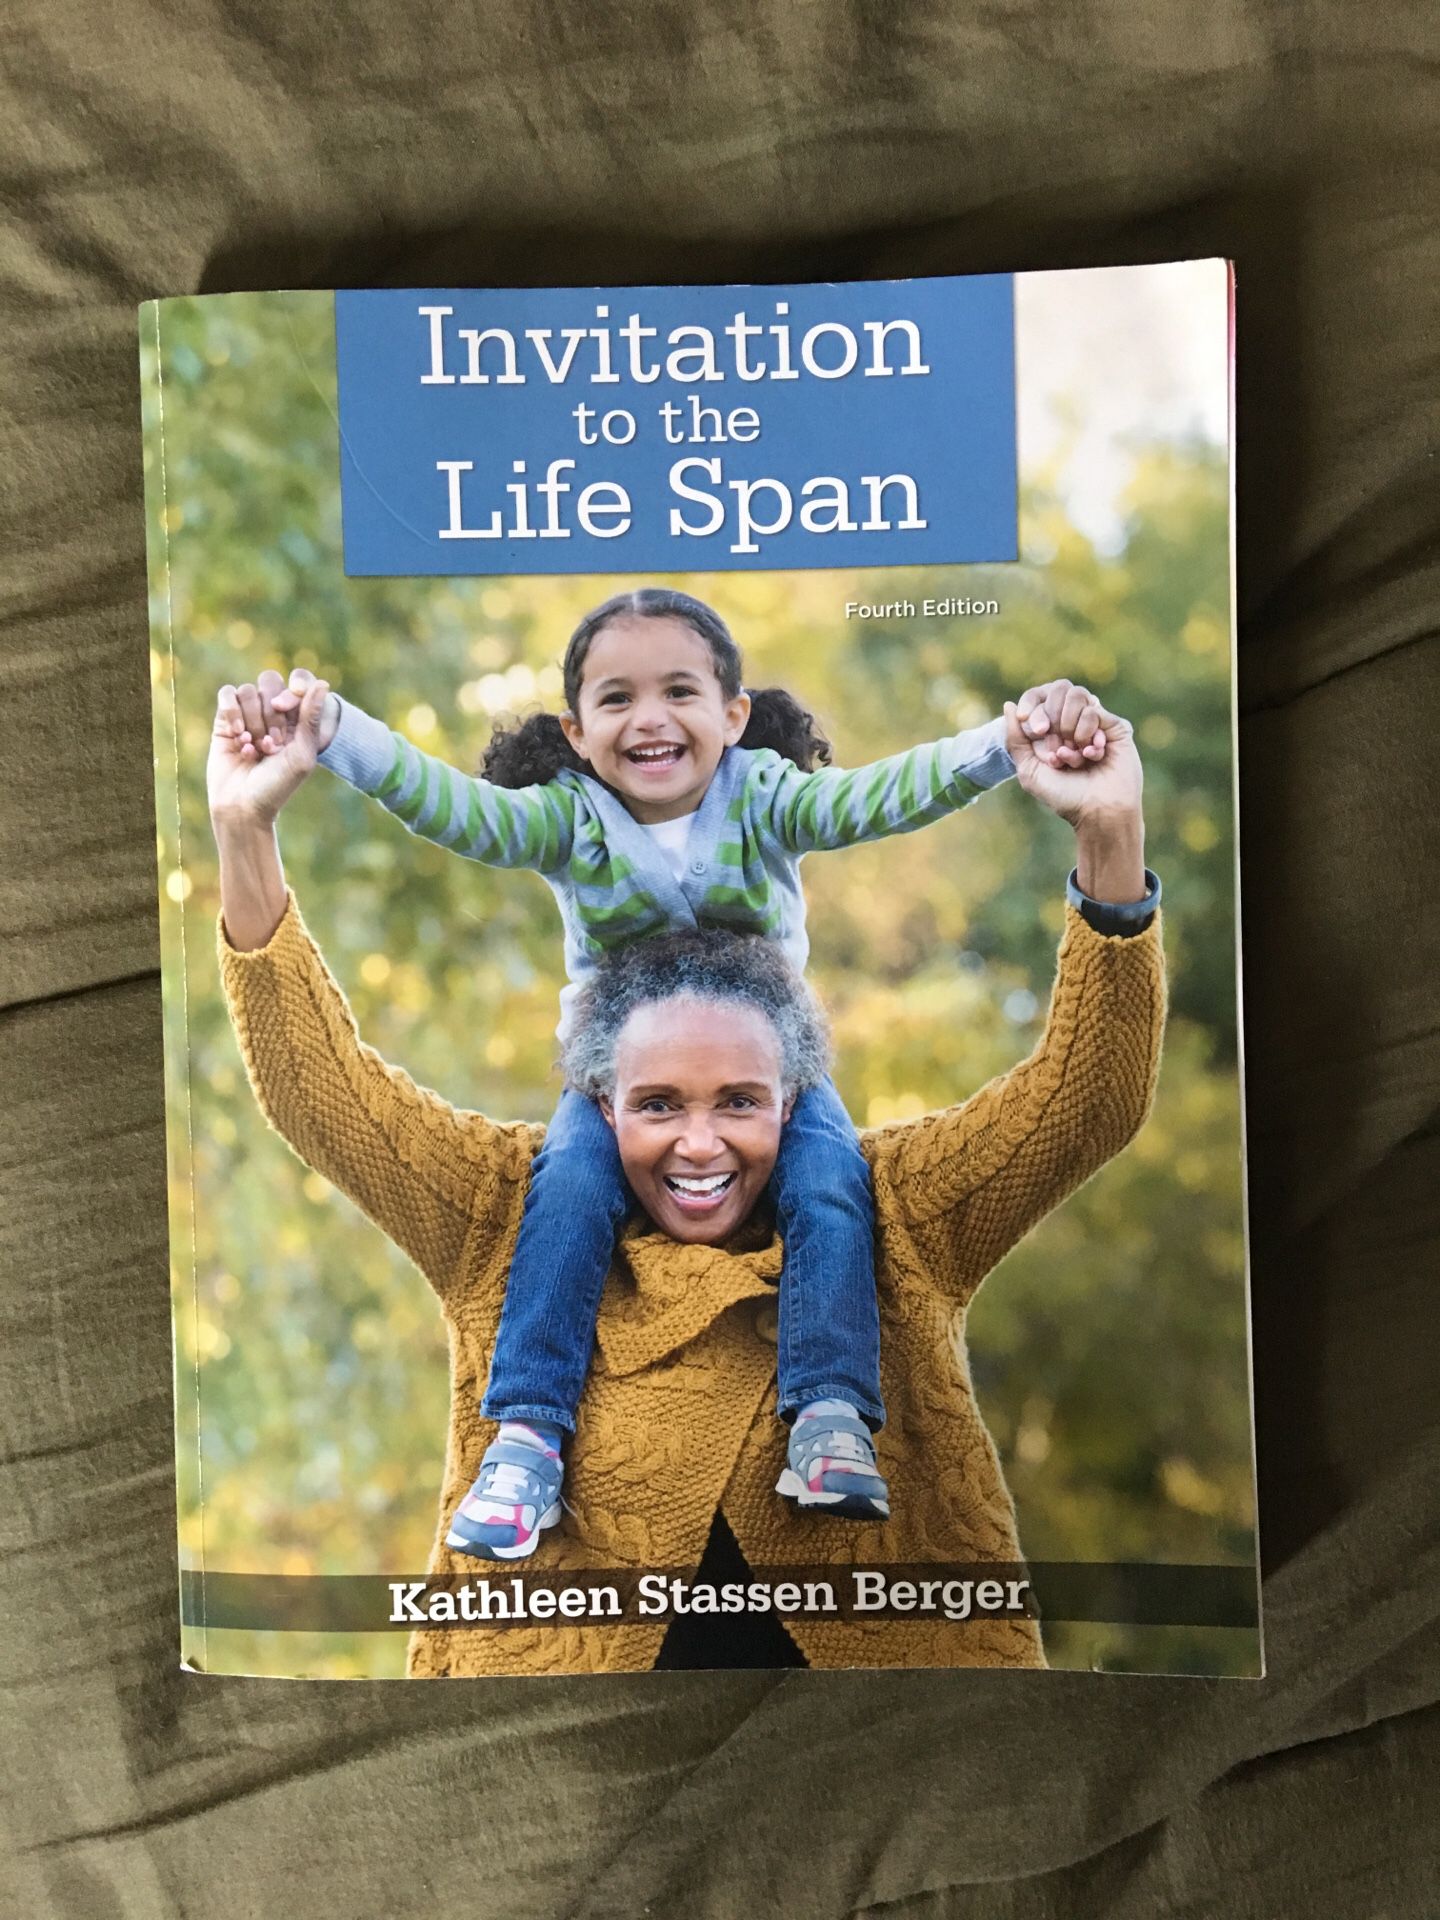 Invitation to the Life Span fourth edition